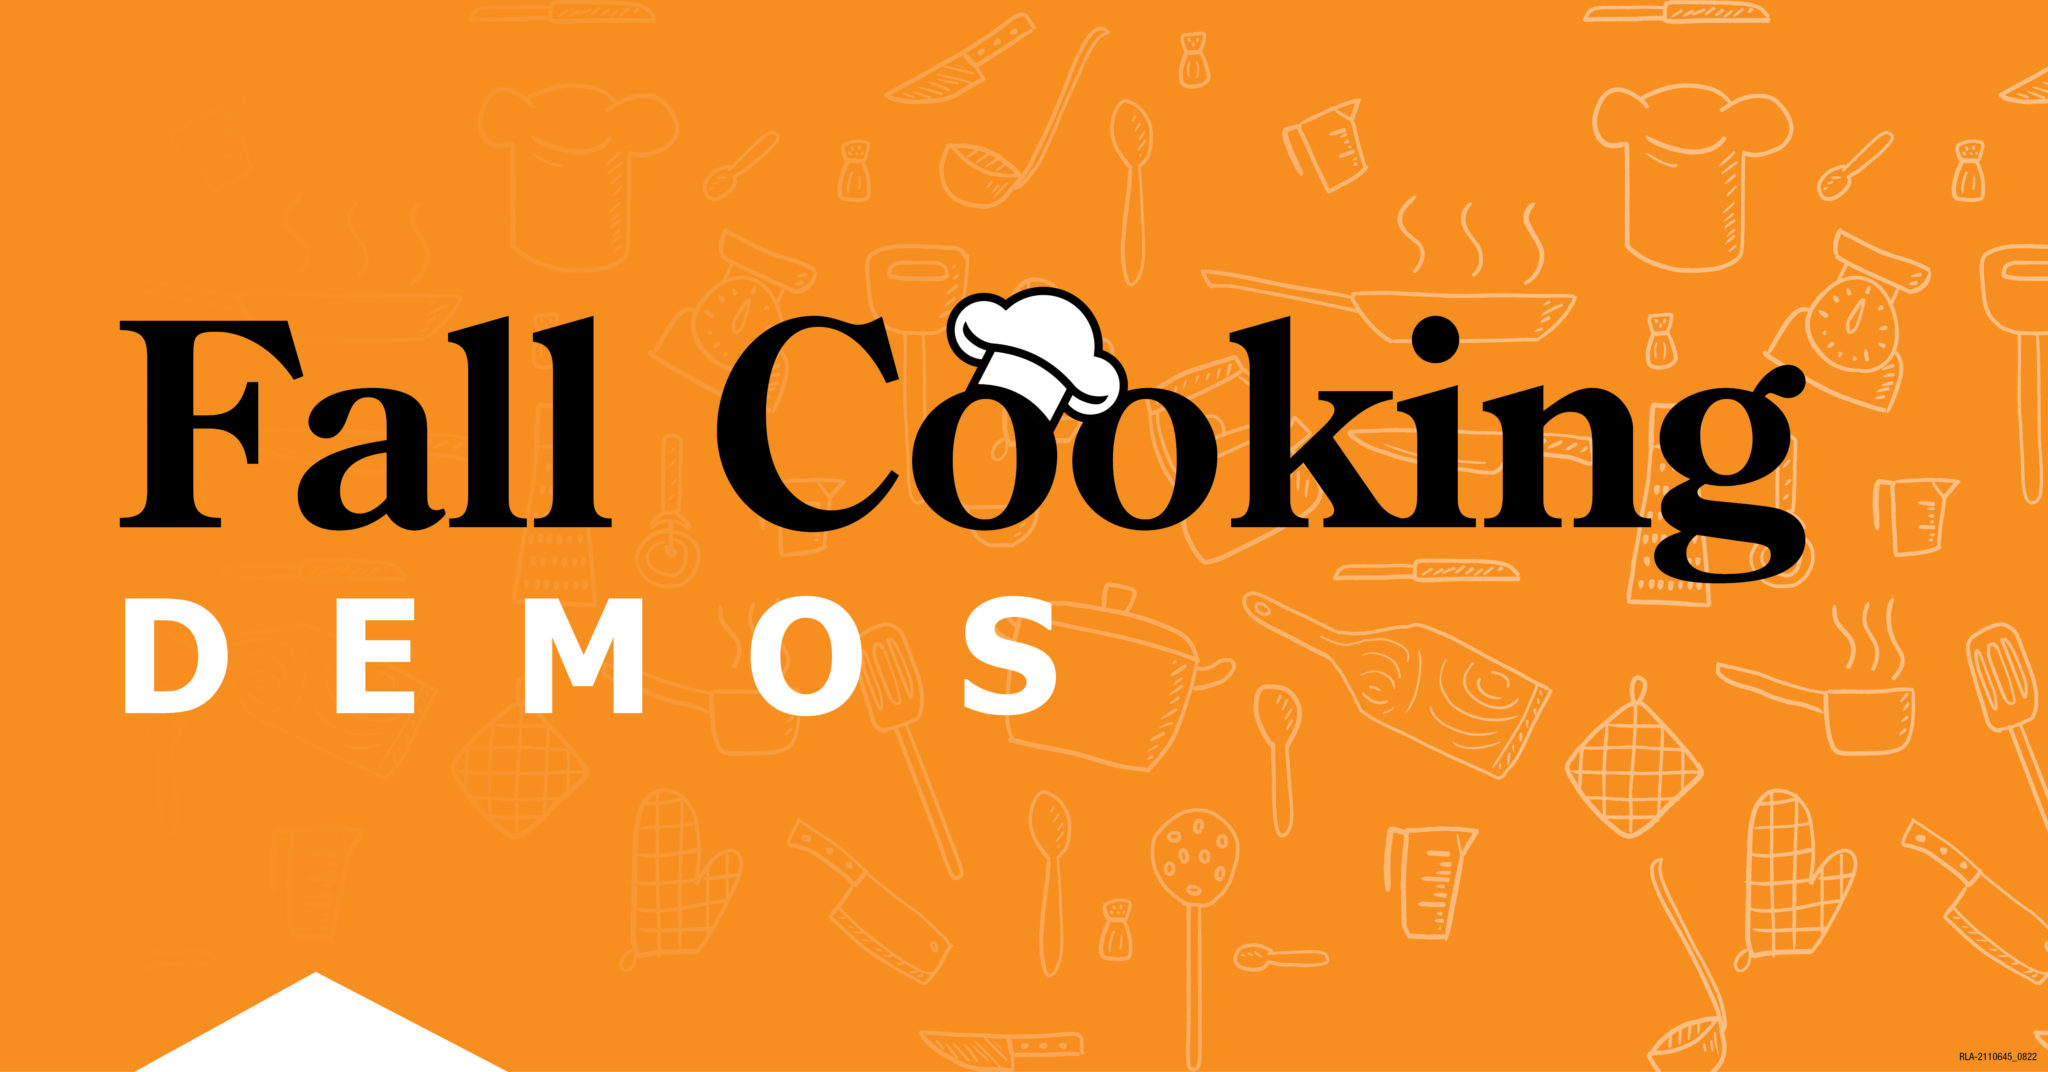 FALL COOKING DEMOS